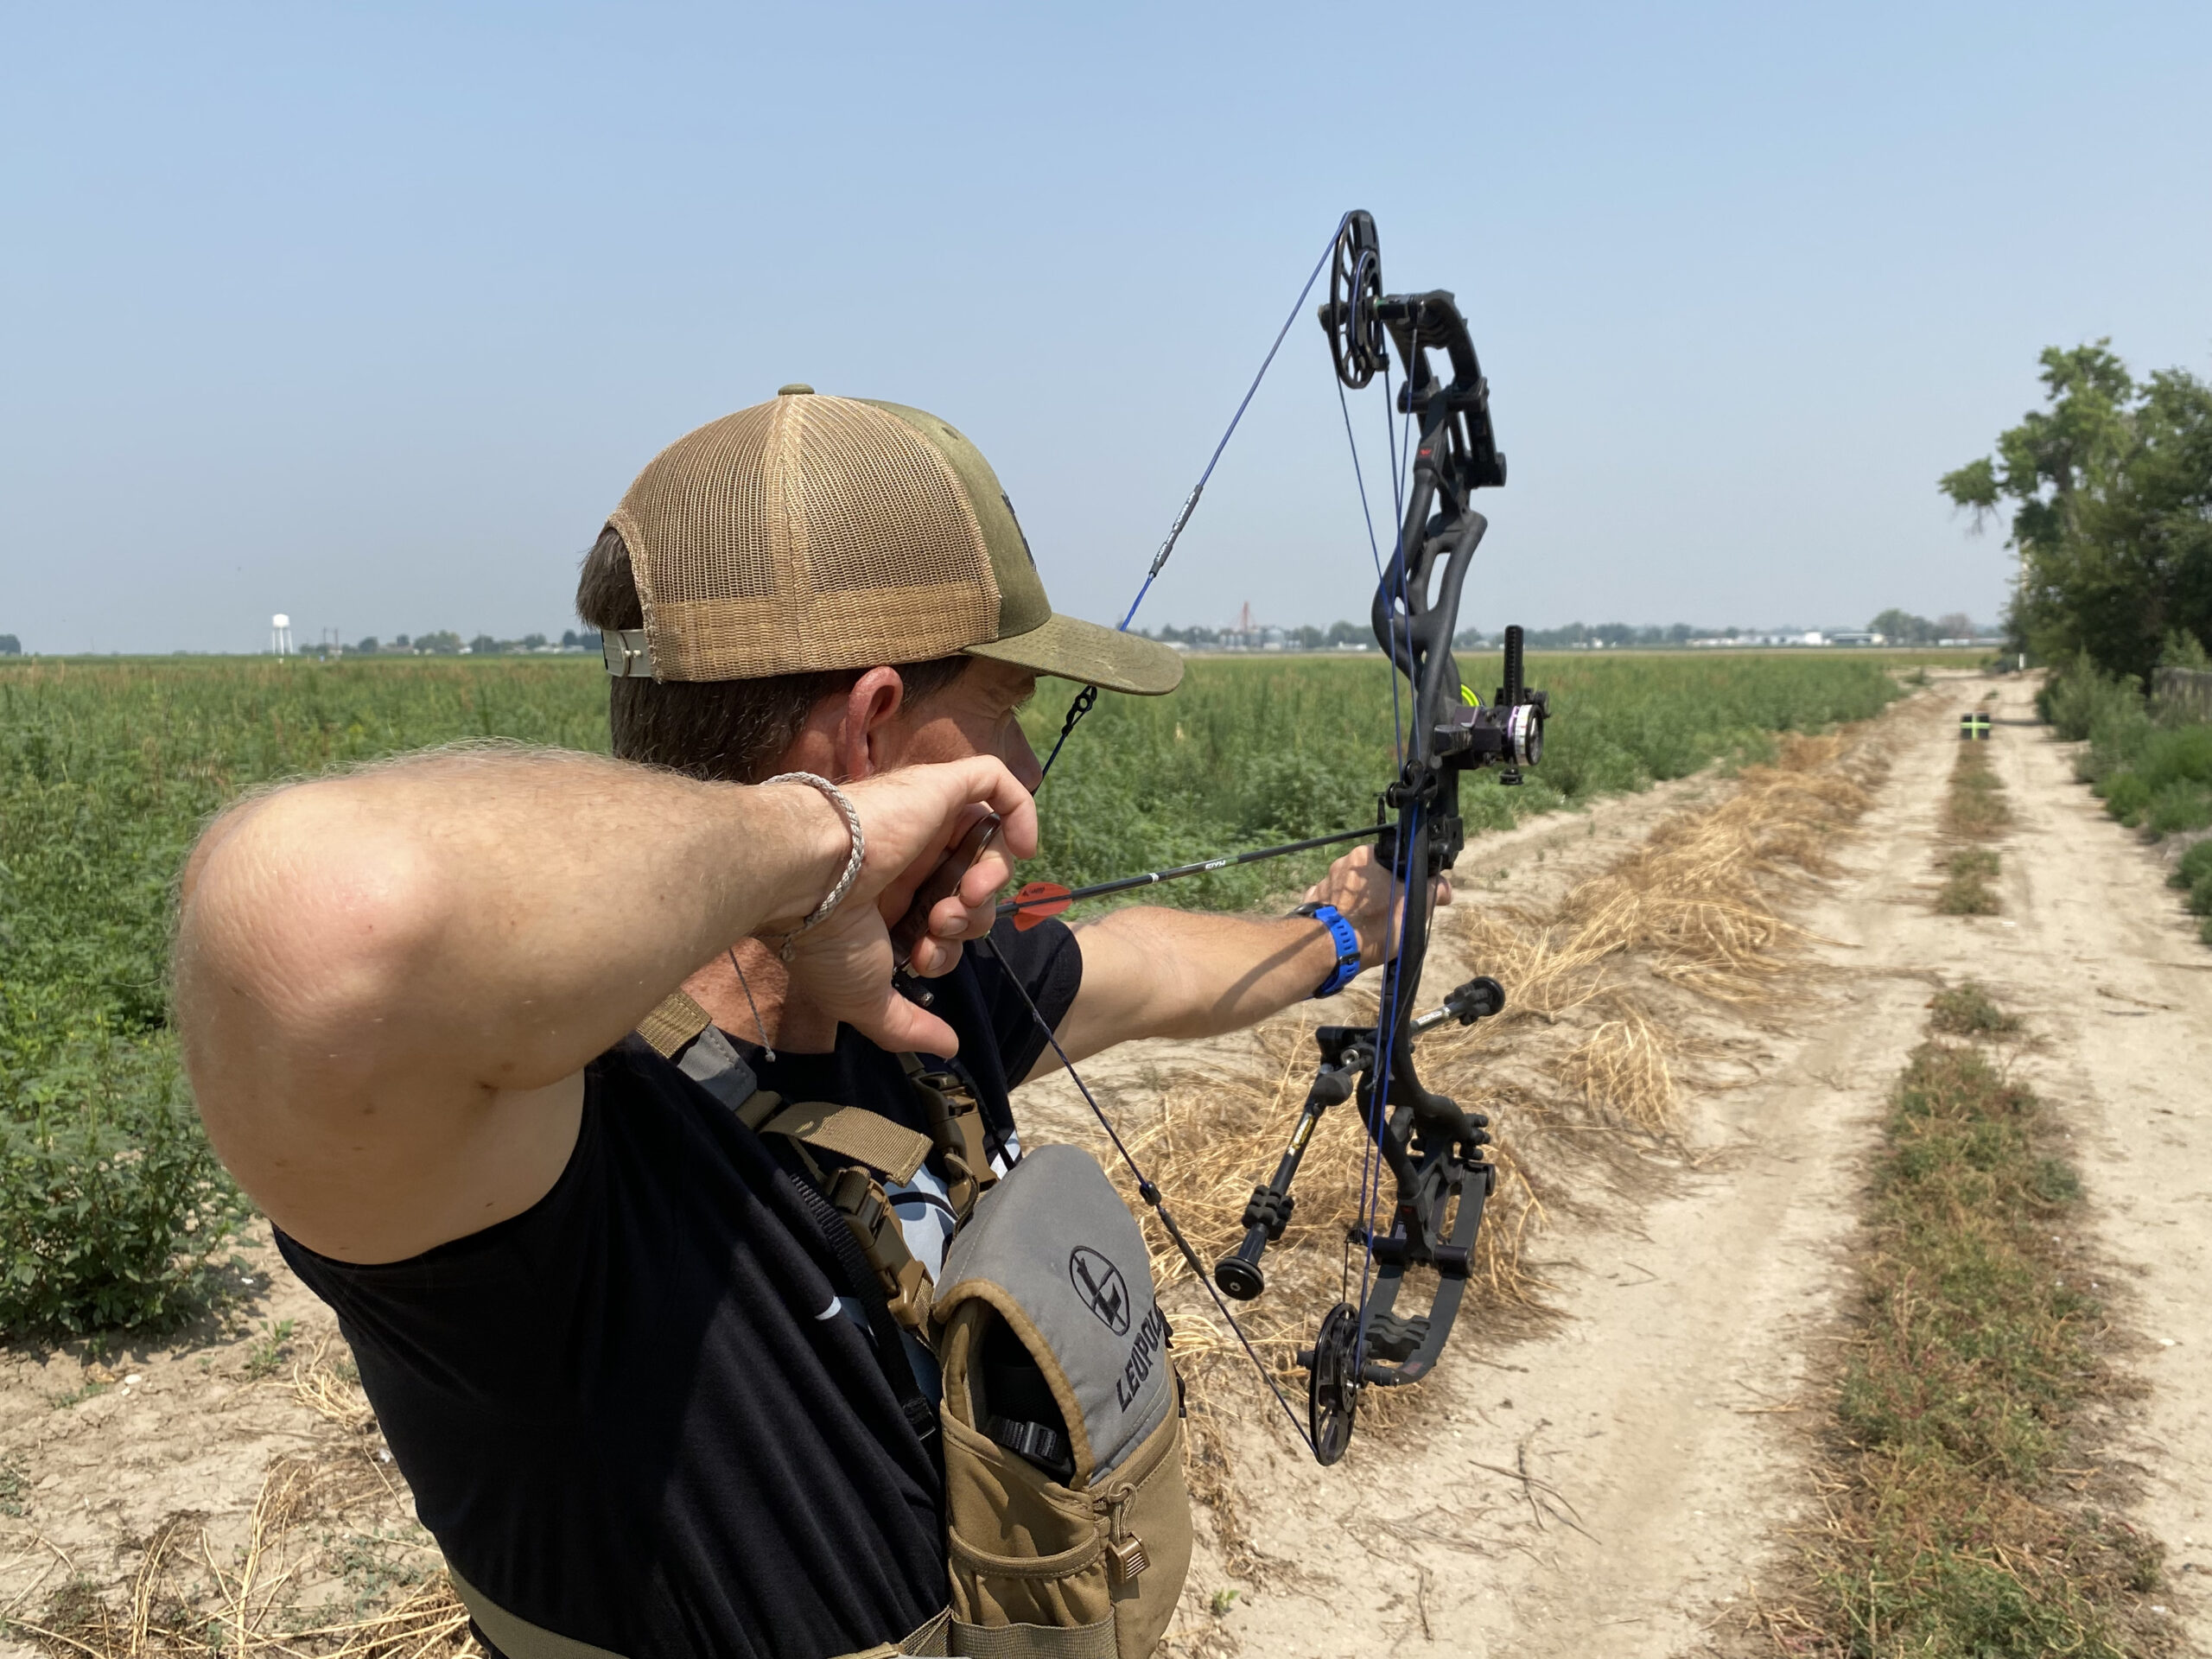 Practice shooting your bow a lot to become more accurate.